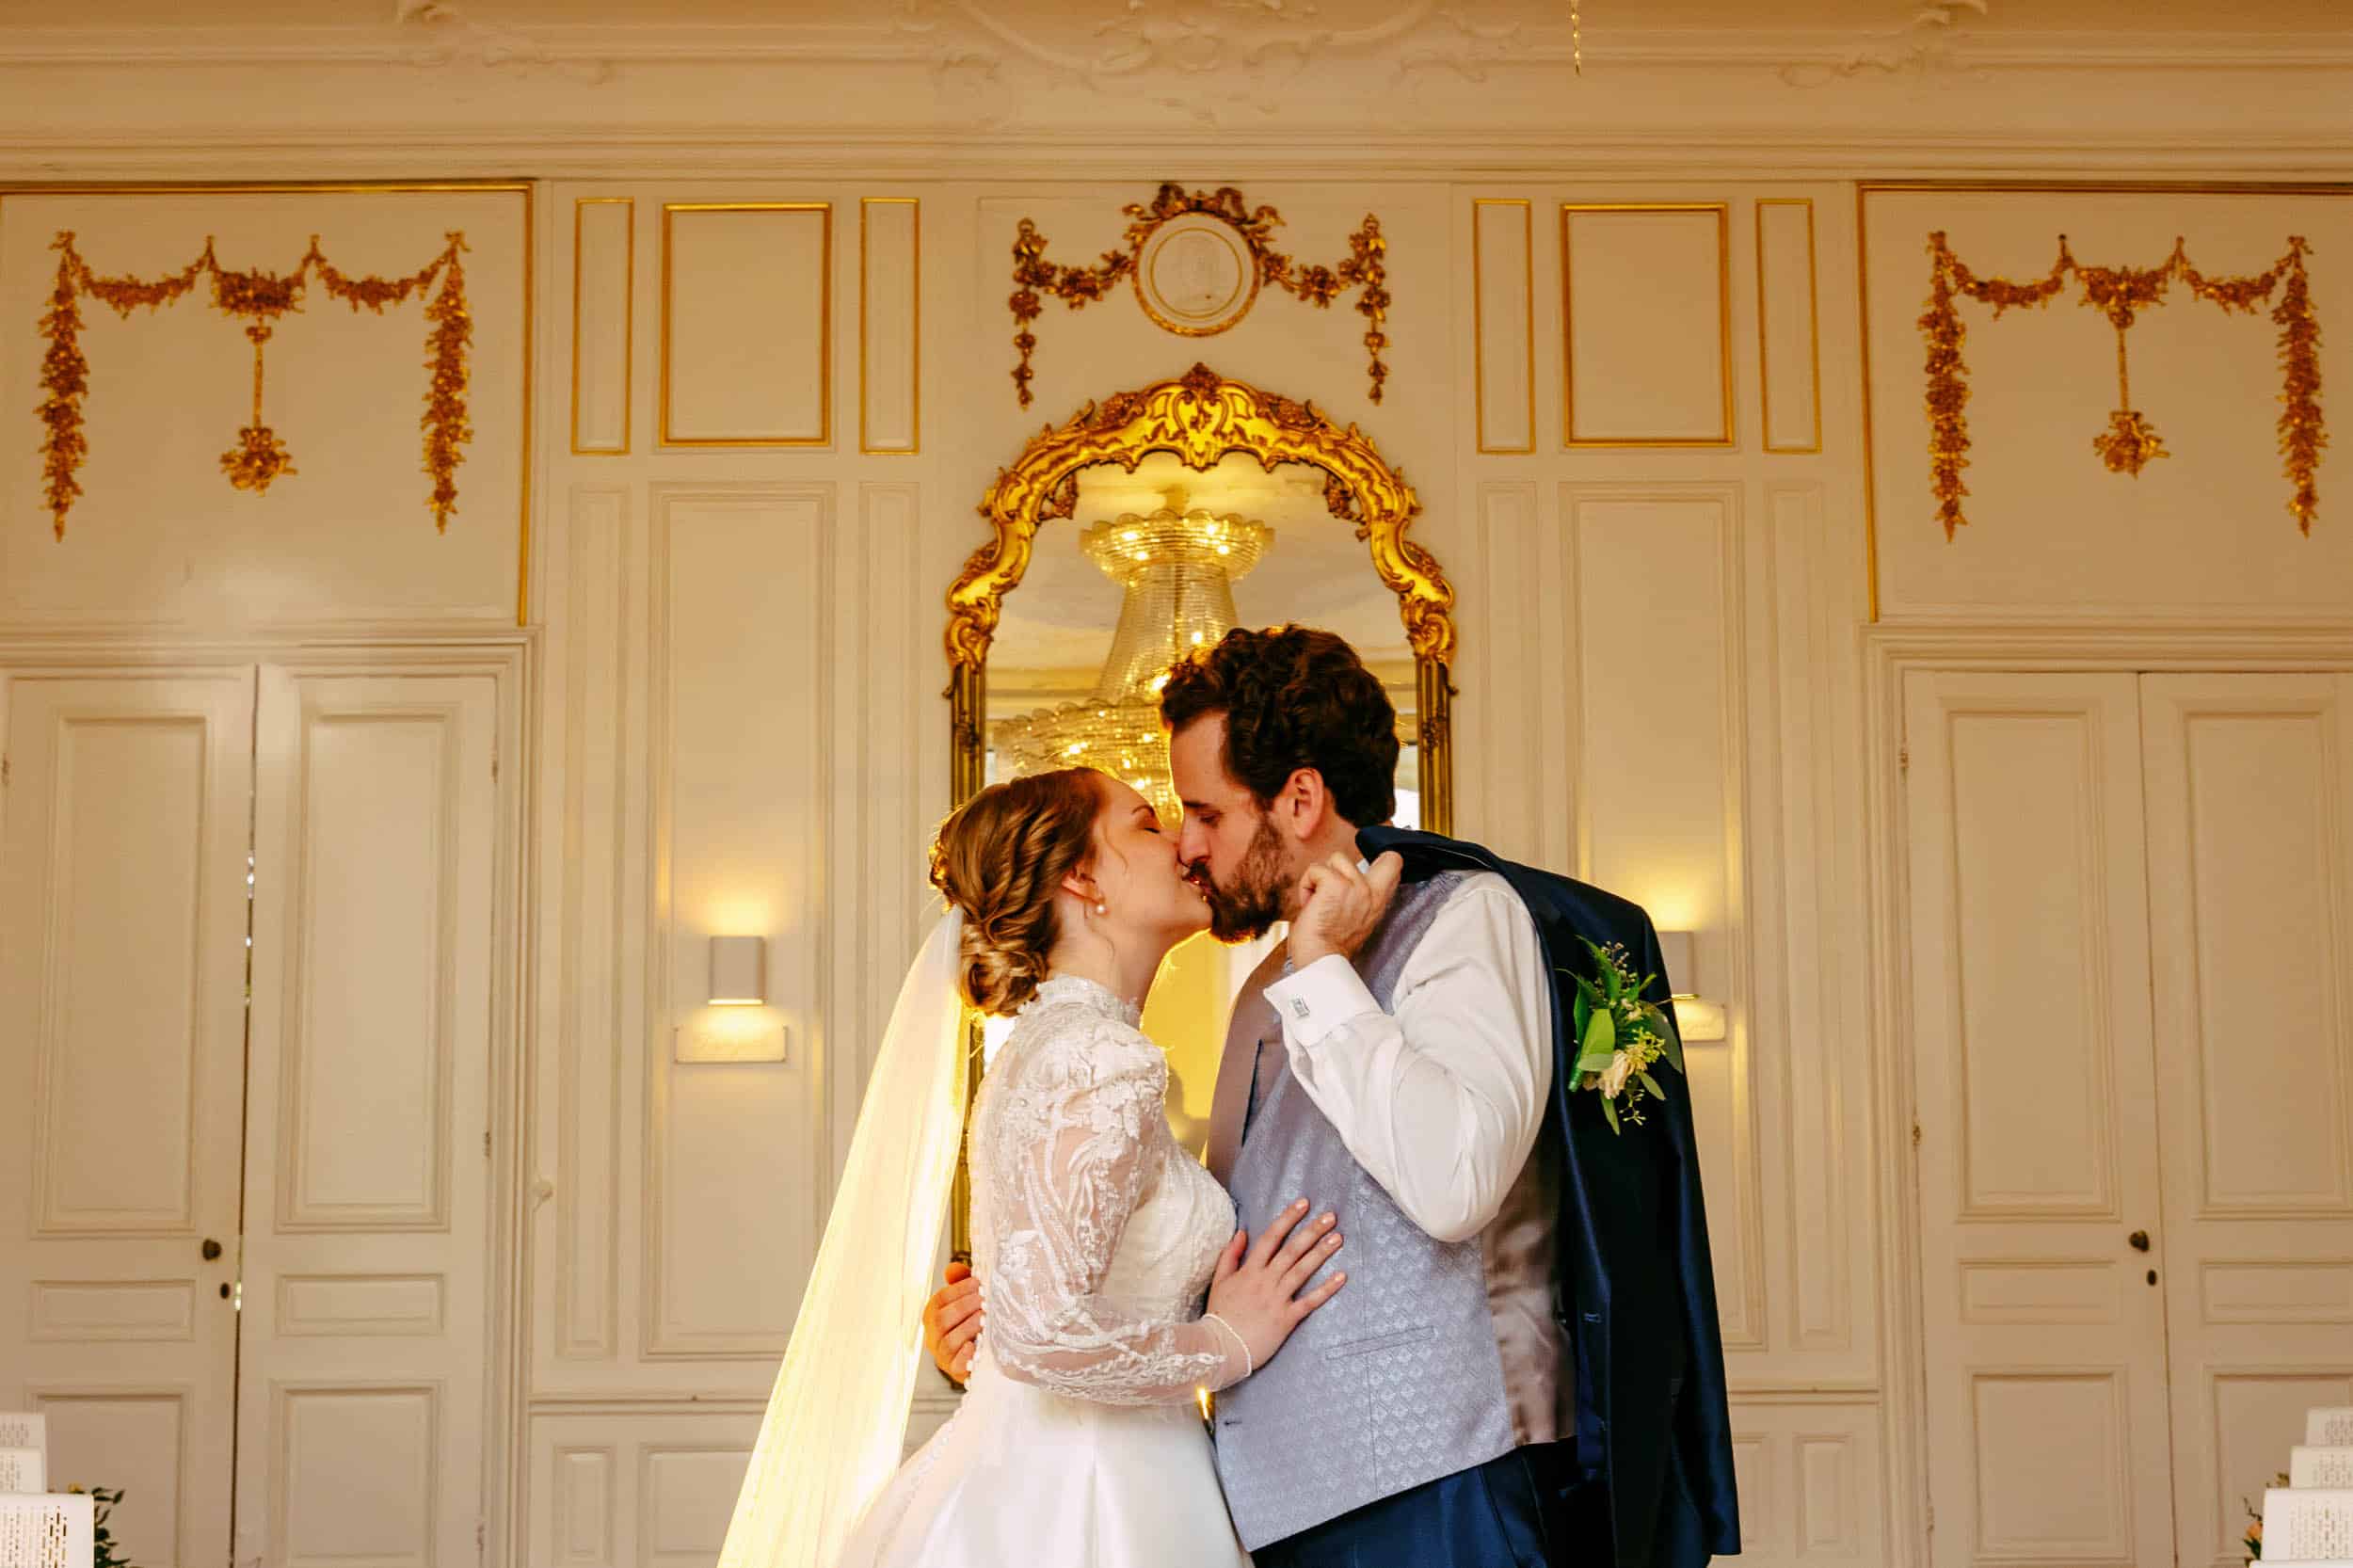 "A bride and groom sharing a passionate kiss in an ornate room, beautifully captured by a wedding photographer. This wedding photo perfectly captures the essence of the perfect wedding